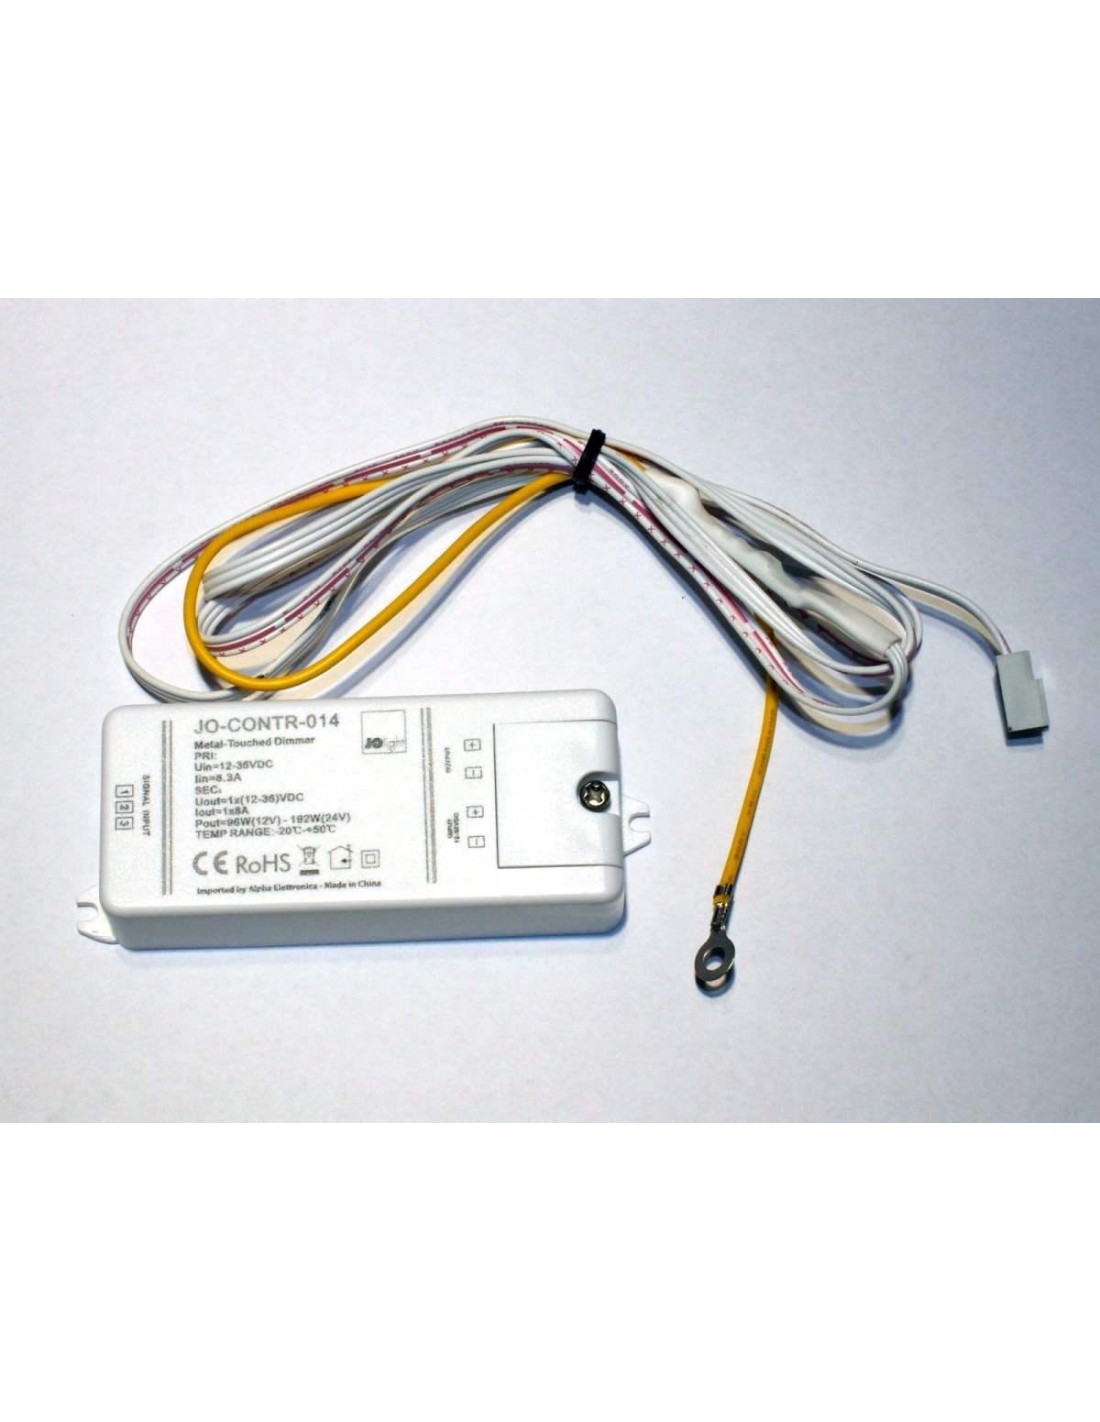 https://www.prometeoelectronics.it/91727-thickbox_default/Interruttore-Dimmer-Metal-Touch-12v-24v-8a-Per-Strip-Led.jpg